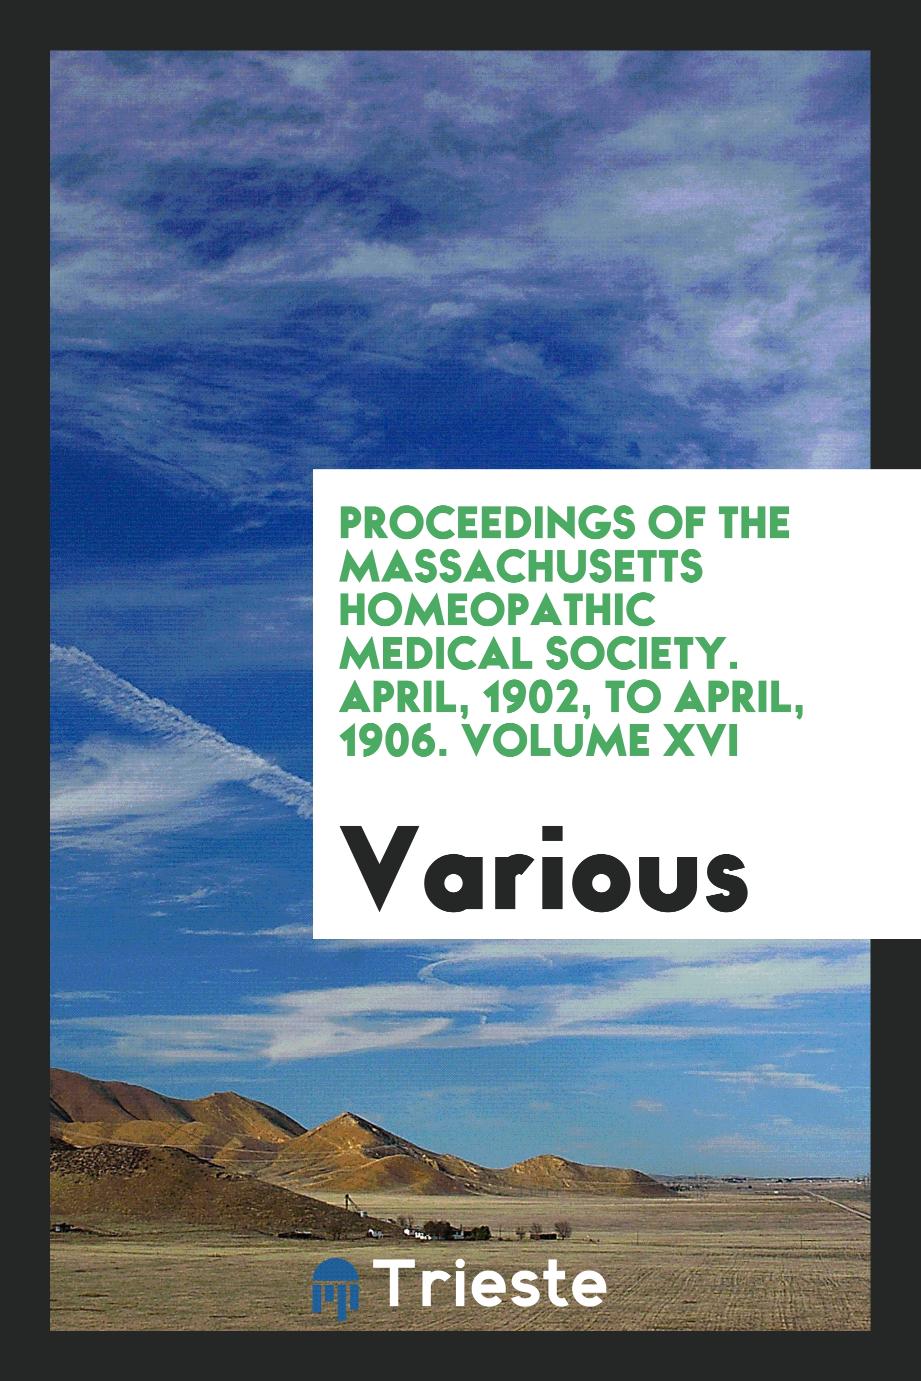 Proceedings of the Massachusetts Homeopathic Medical Society. April, 1902, to April, 1906. Volume XVI